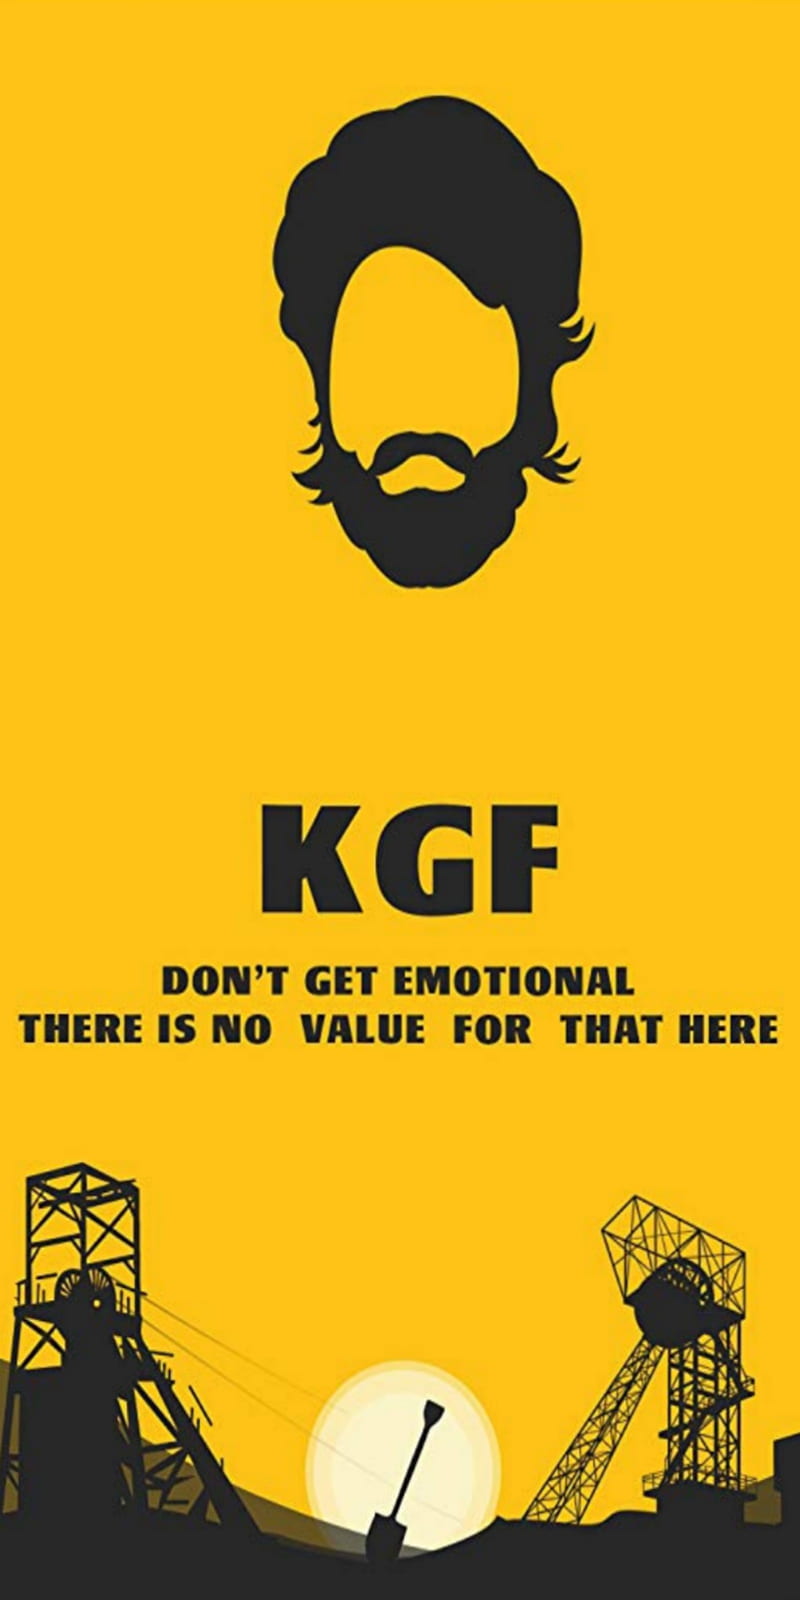 KGF - Chapter 2' (Hindi) makes Rs 143.64 crore in 3 days; on track to  breach 200 Crore Club in record time